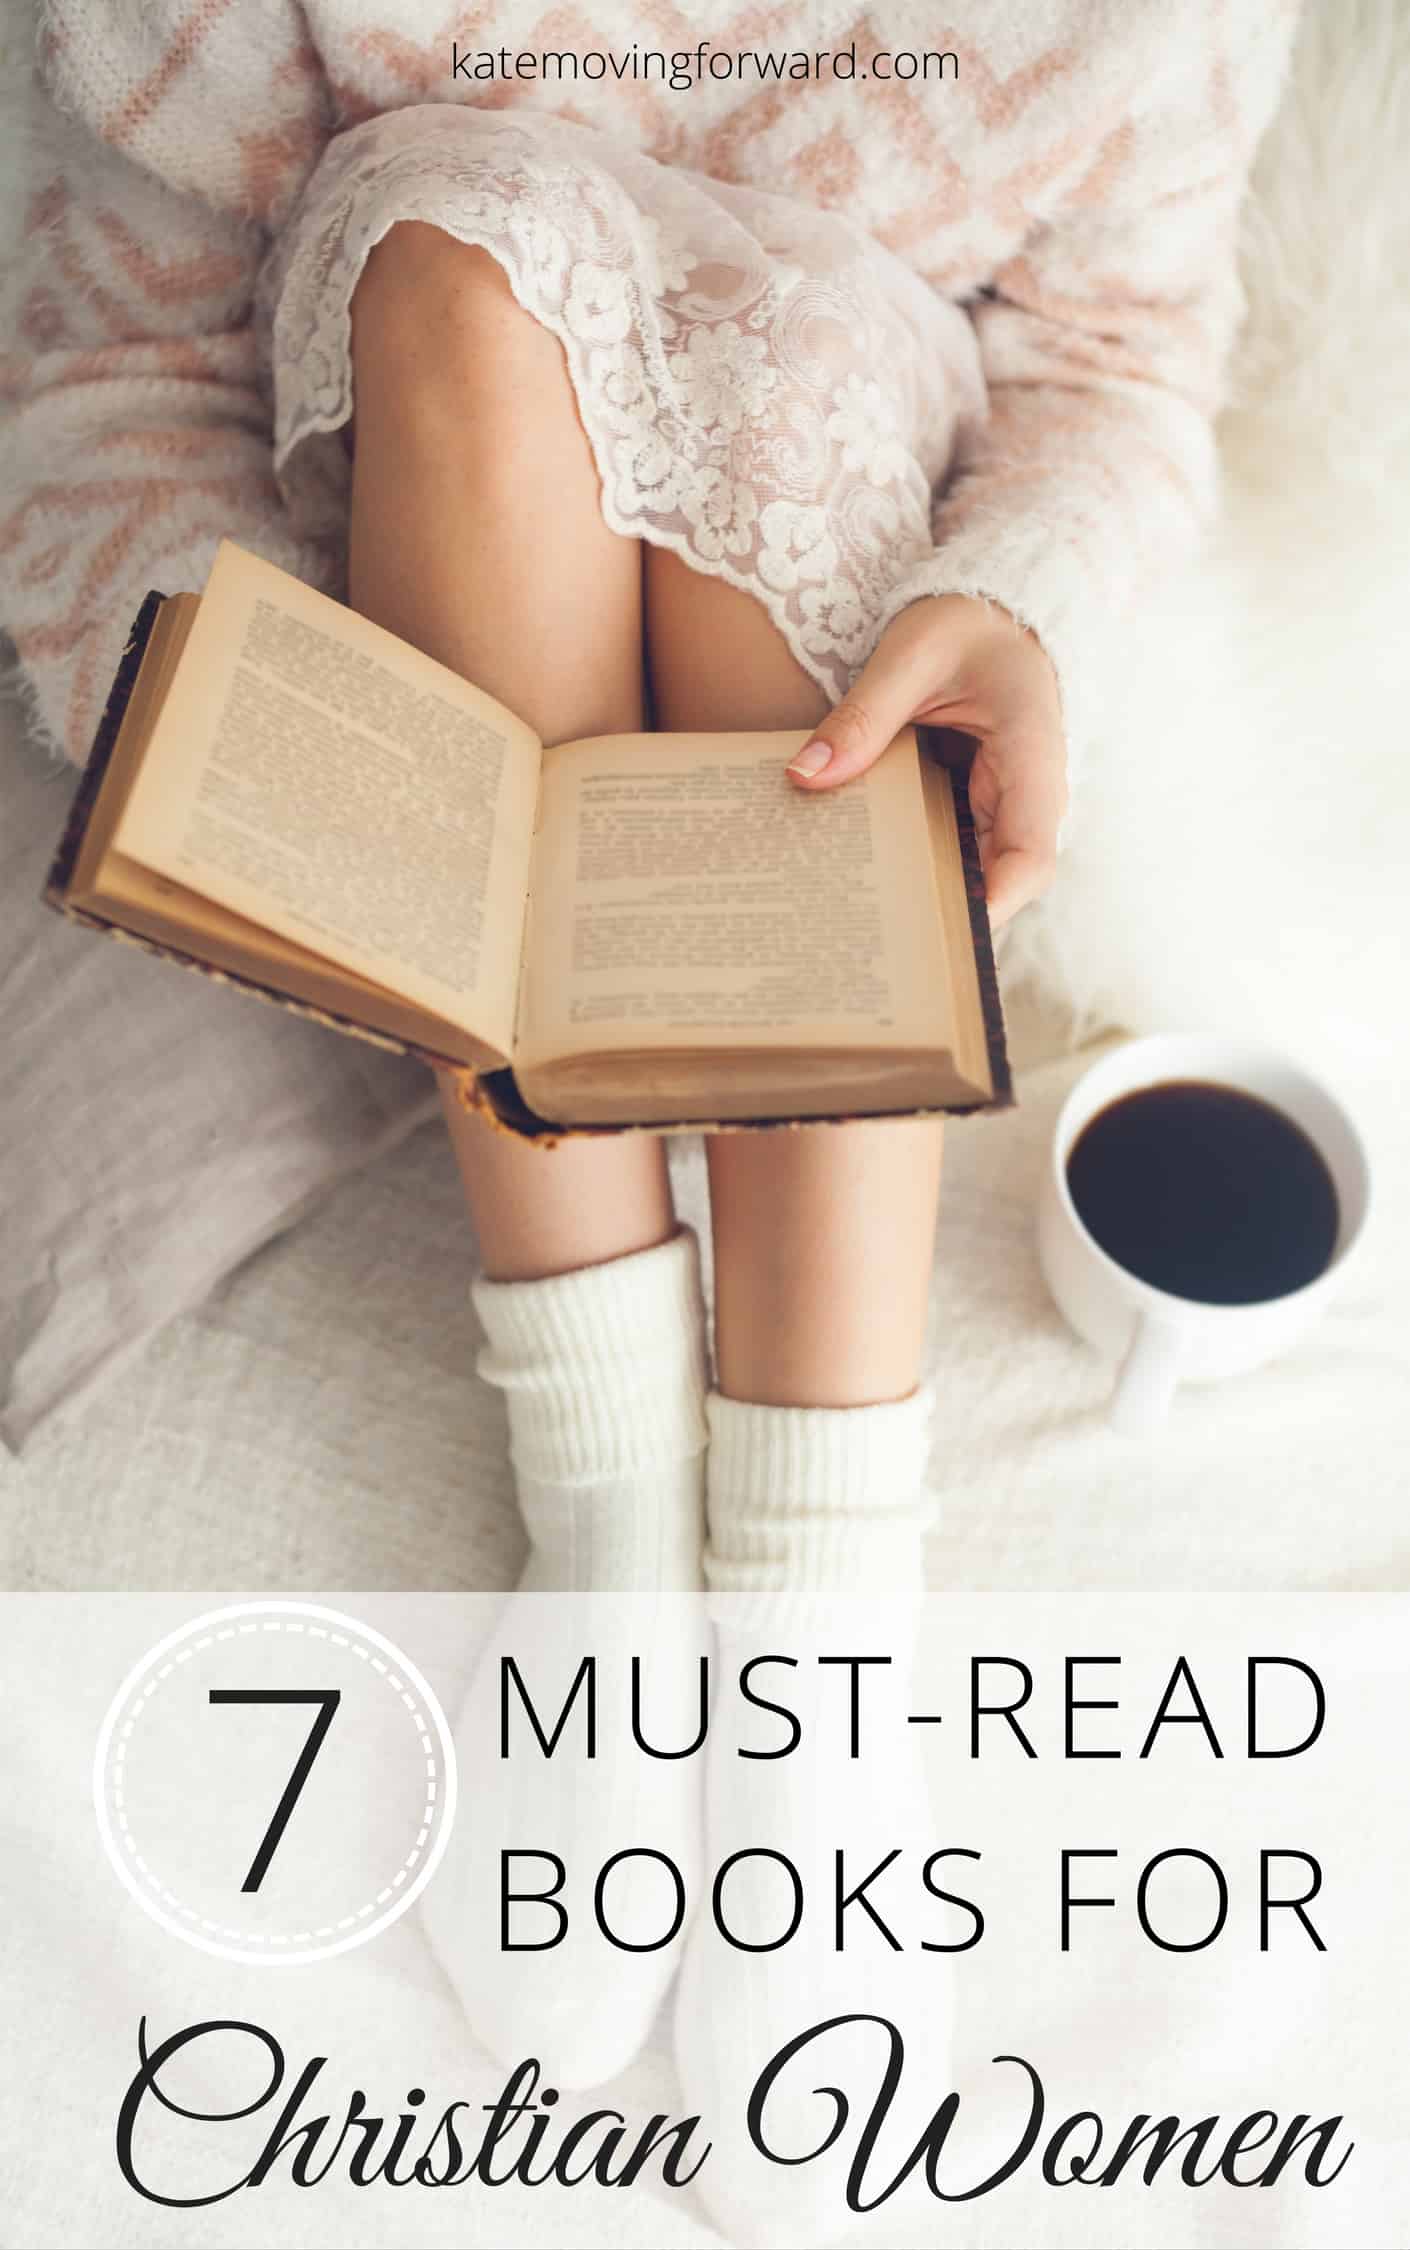 7 Must Read Books for Christian Women - Looking for spiritual encouragement as a Christian women? Here are some amazing books to help grow your faith! 